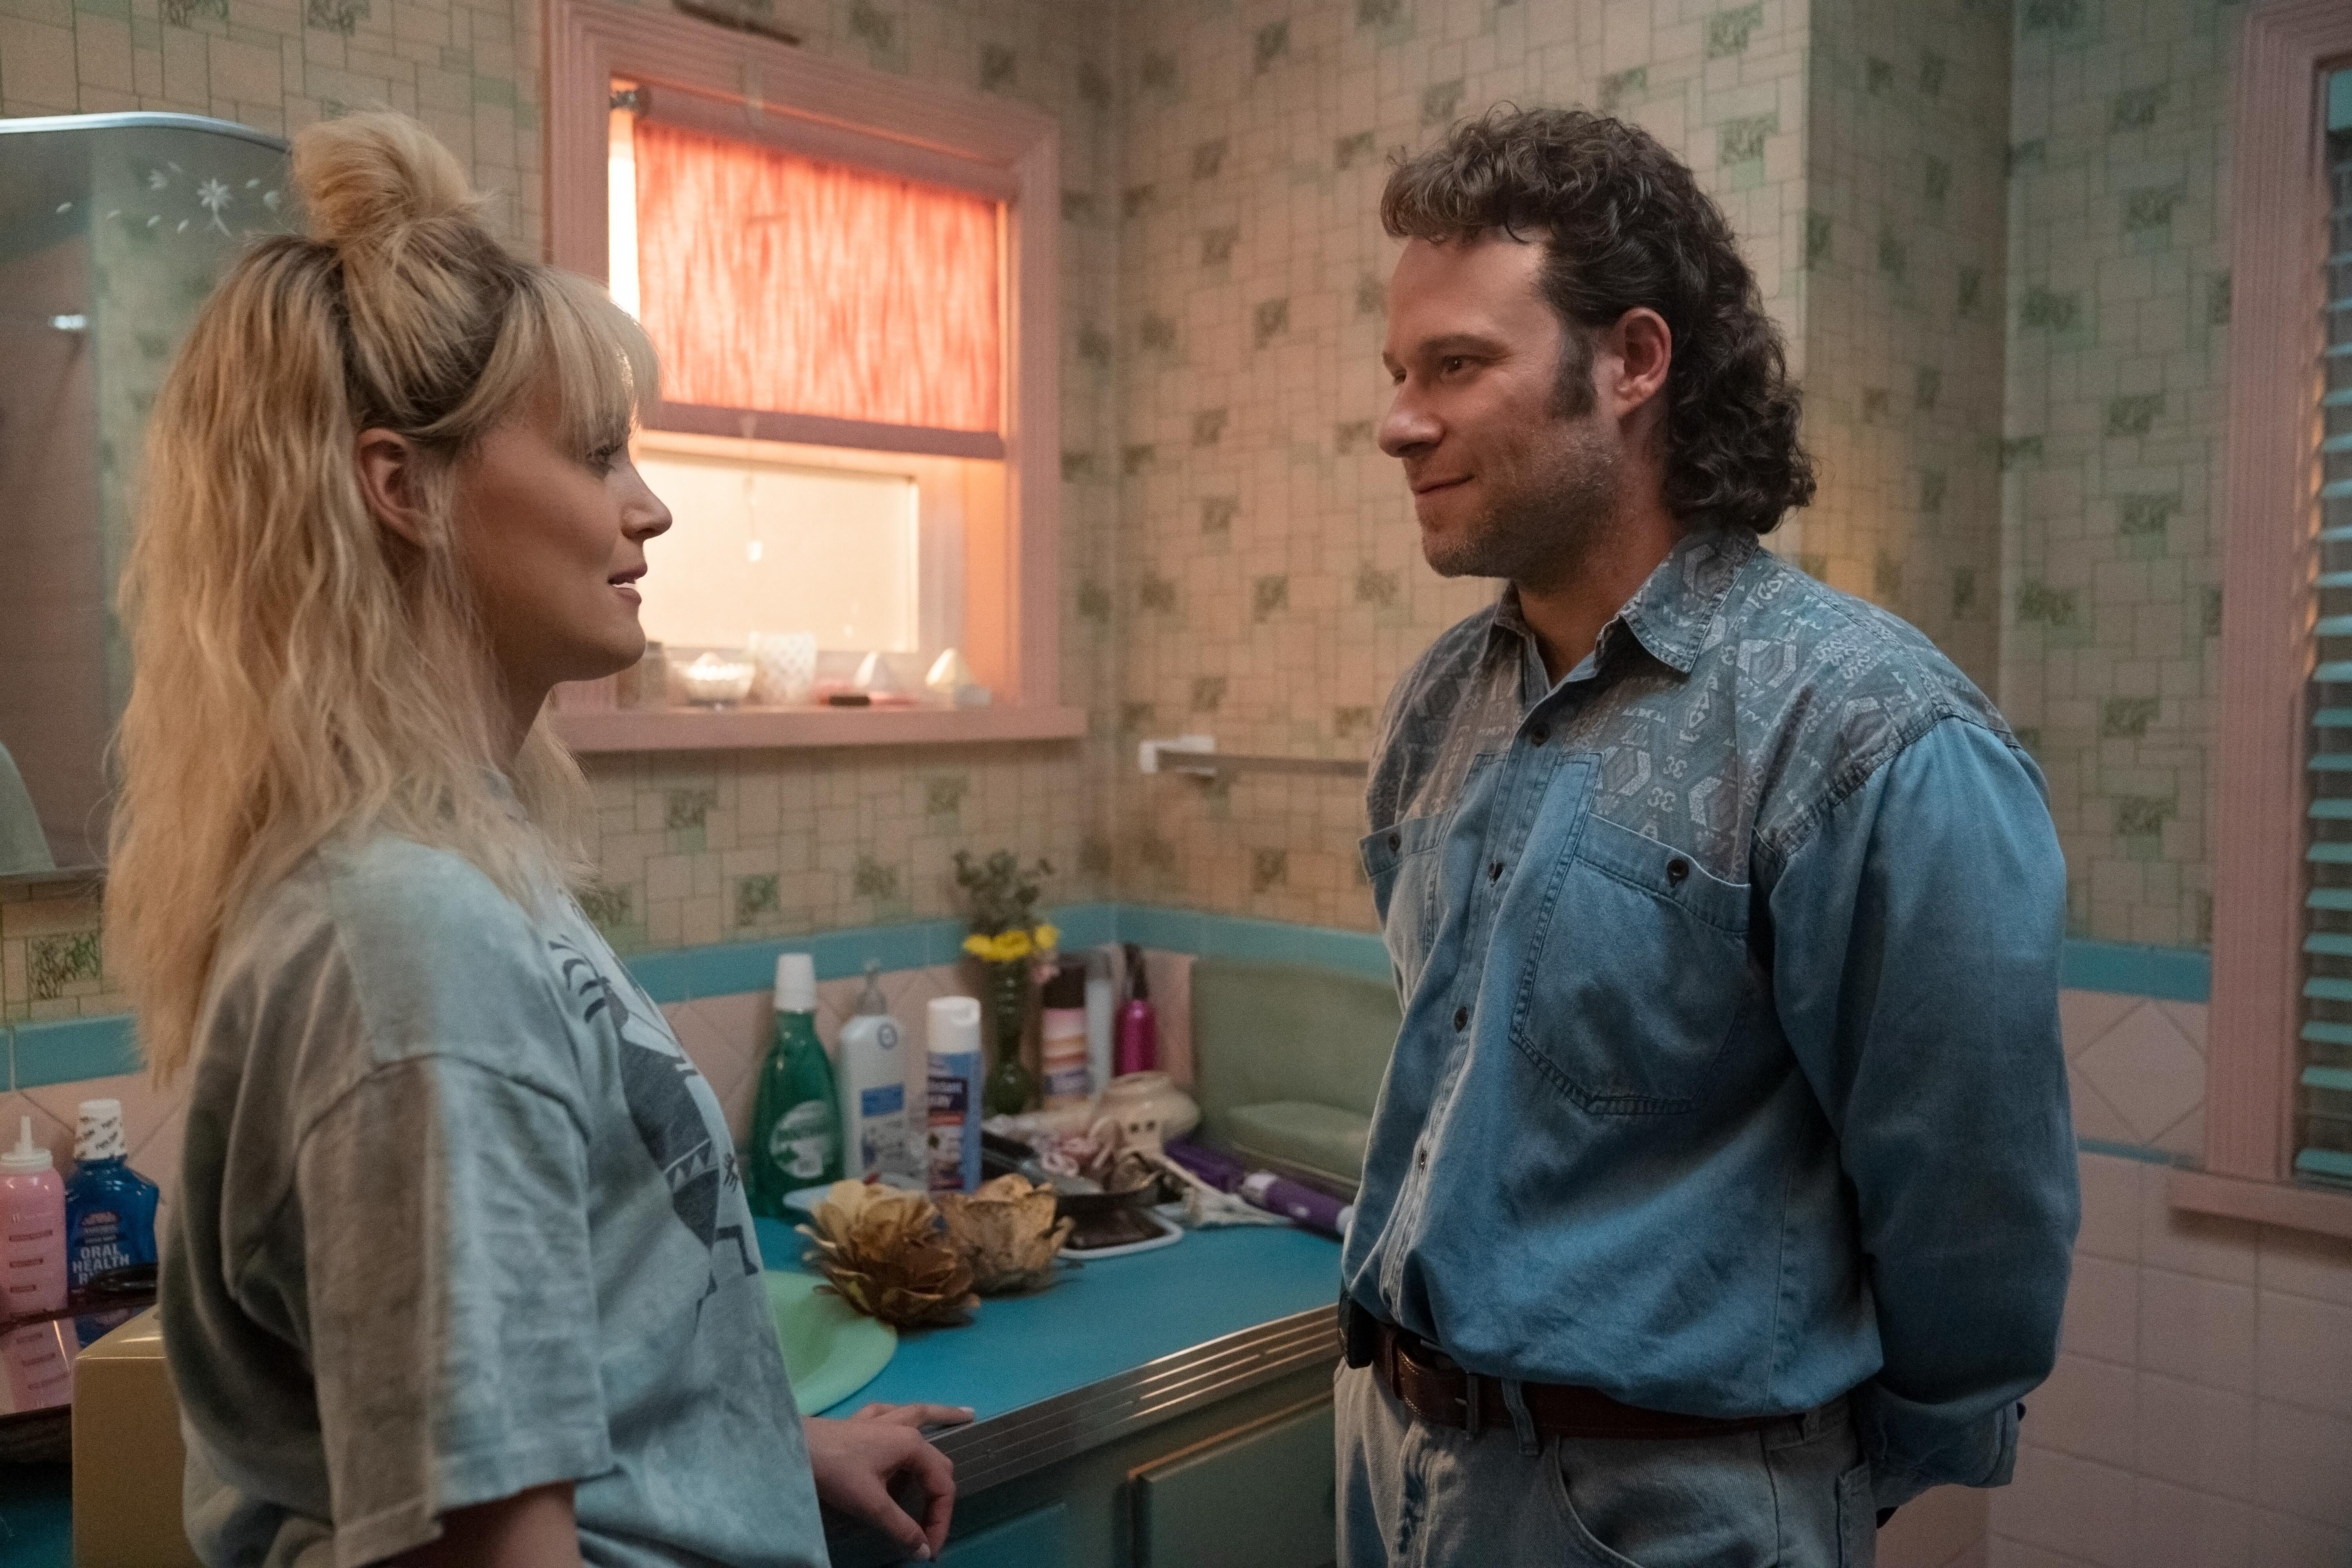 Taylor Schilling and Seth Rogen in 'Pam & Tommy' as Erica and Rand talking in the bathroom. 